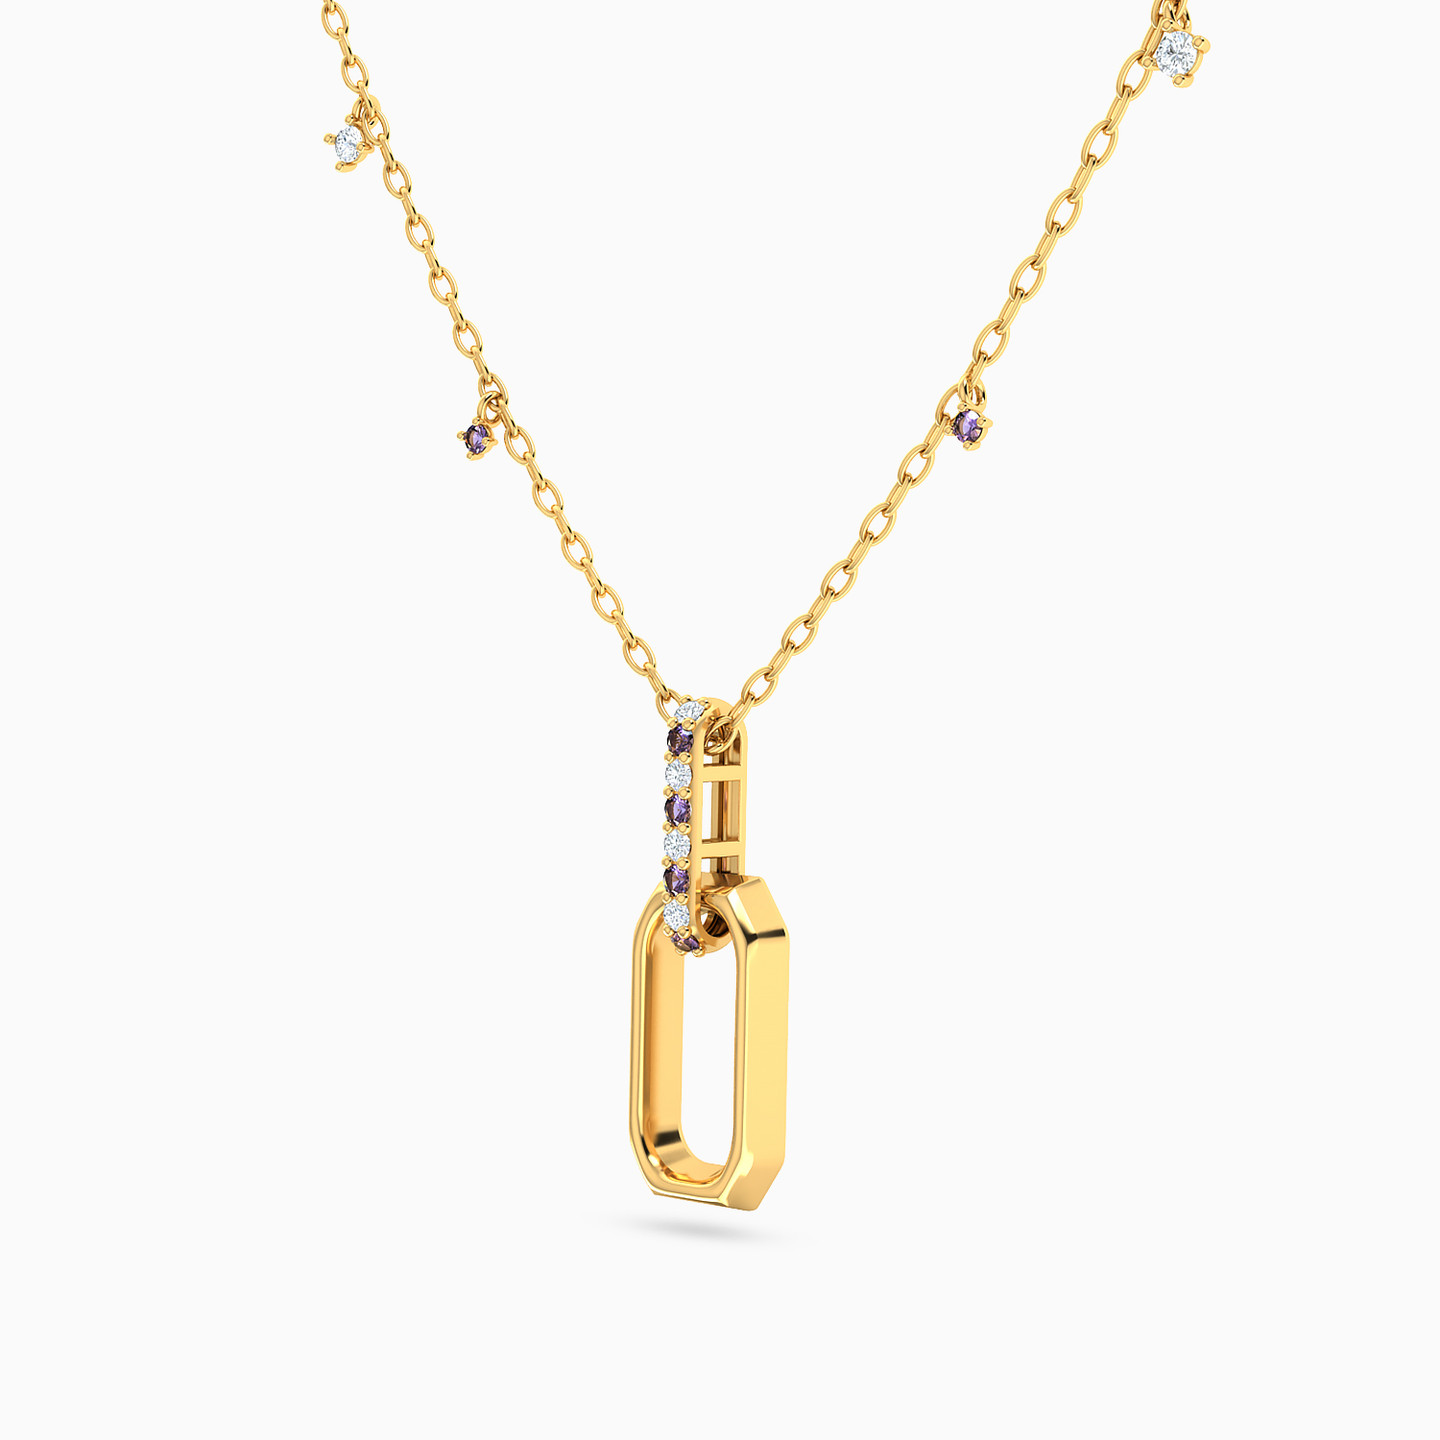 Rectangle Shaped Colored Stones Pendant with 18K Gold Chain - 2